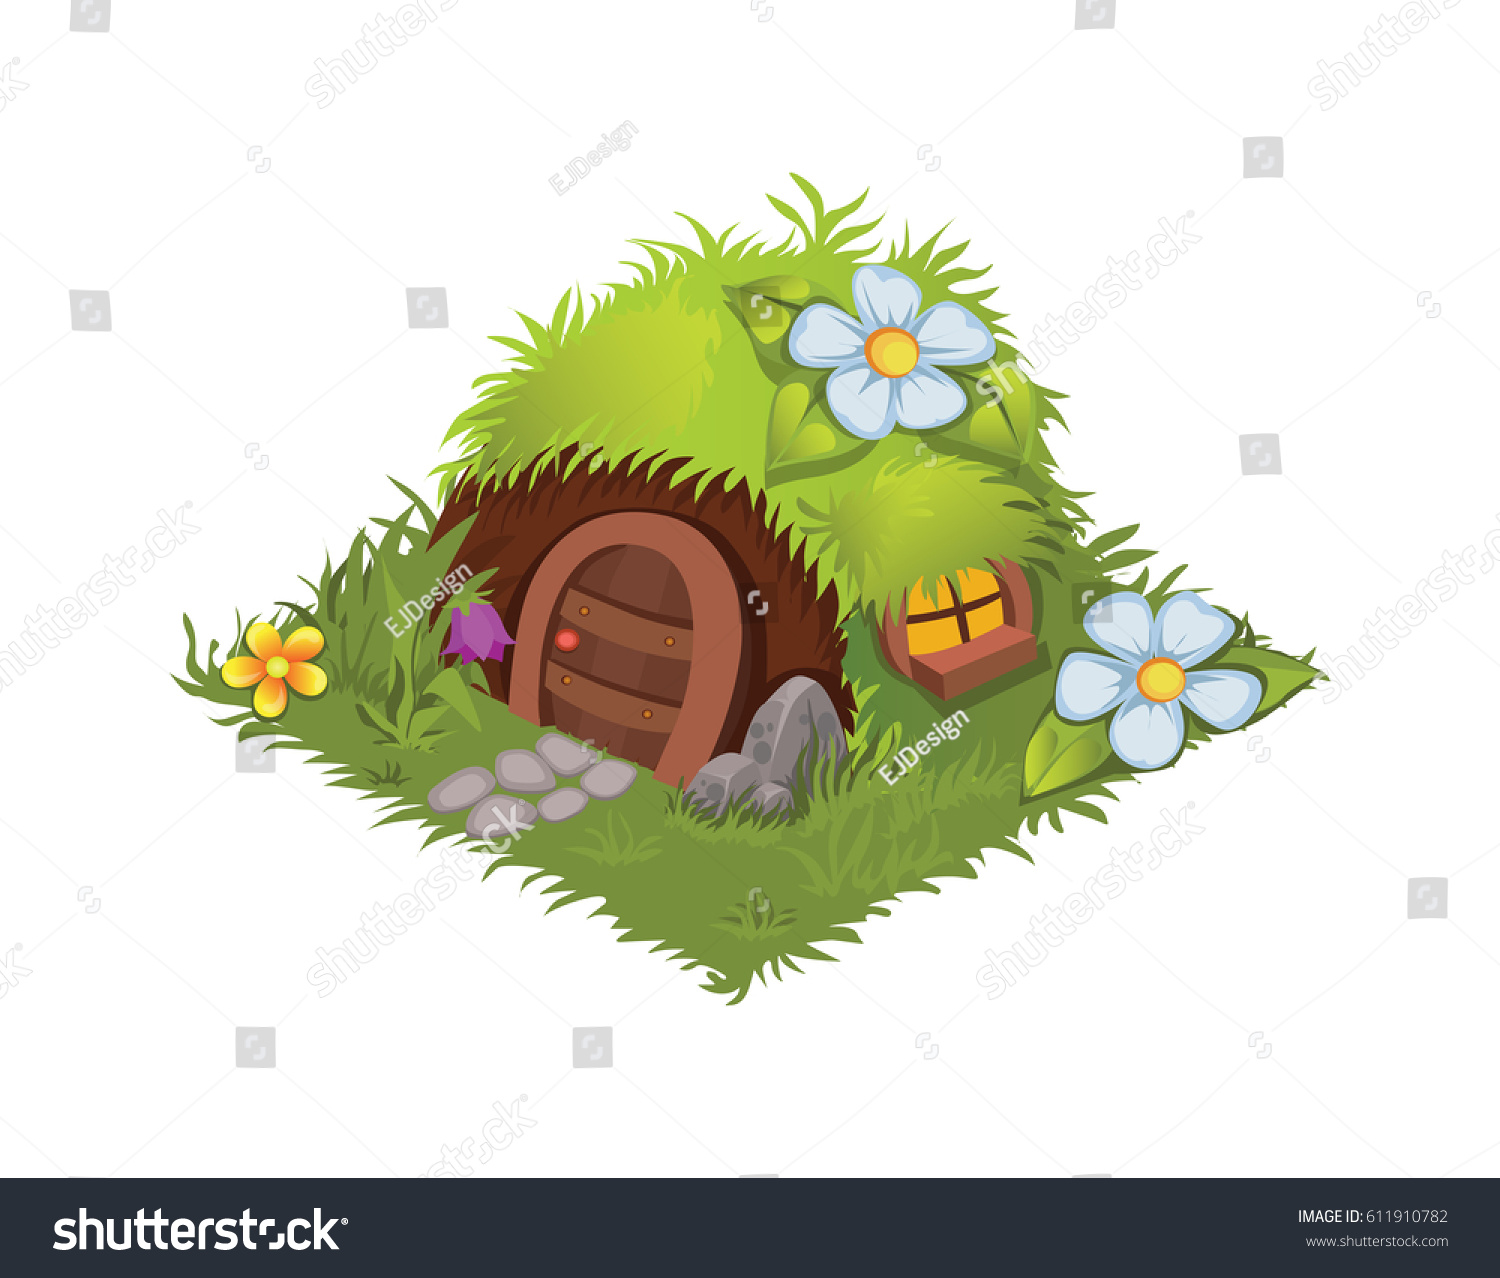 SVG of Isometric Cartoon Fantasy Village House Decorated with Flowers - Elements for Tileset Map, Landscape Design or Game Object in Colorful Detailed Vector svg